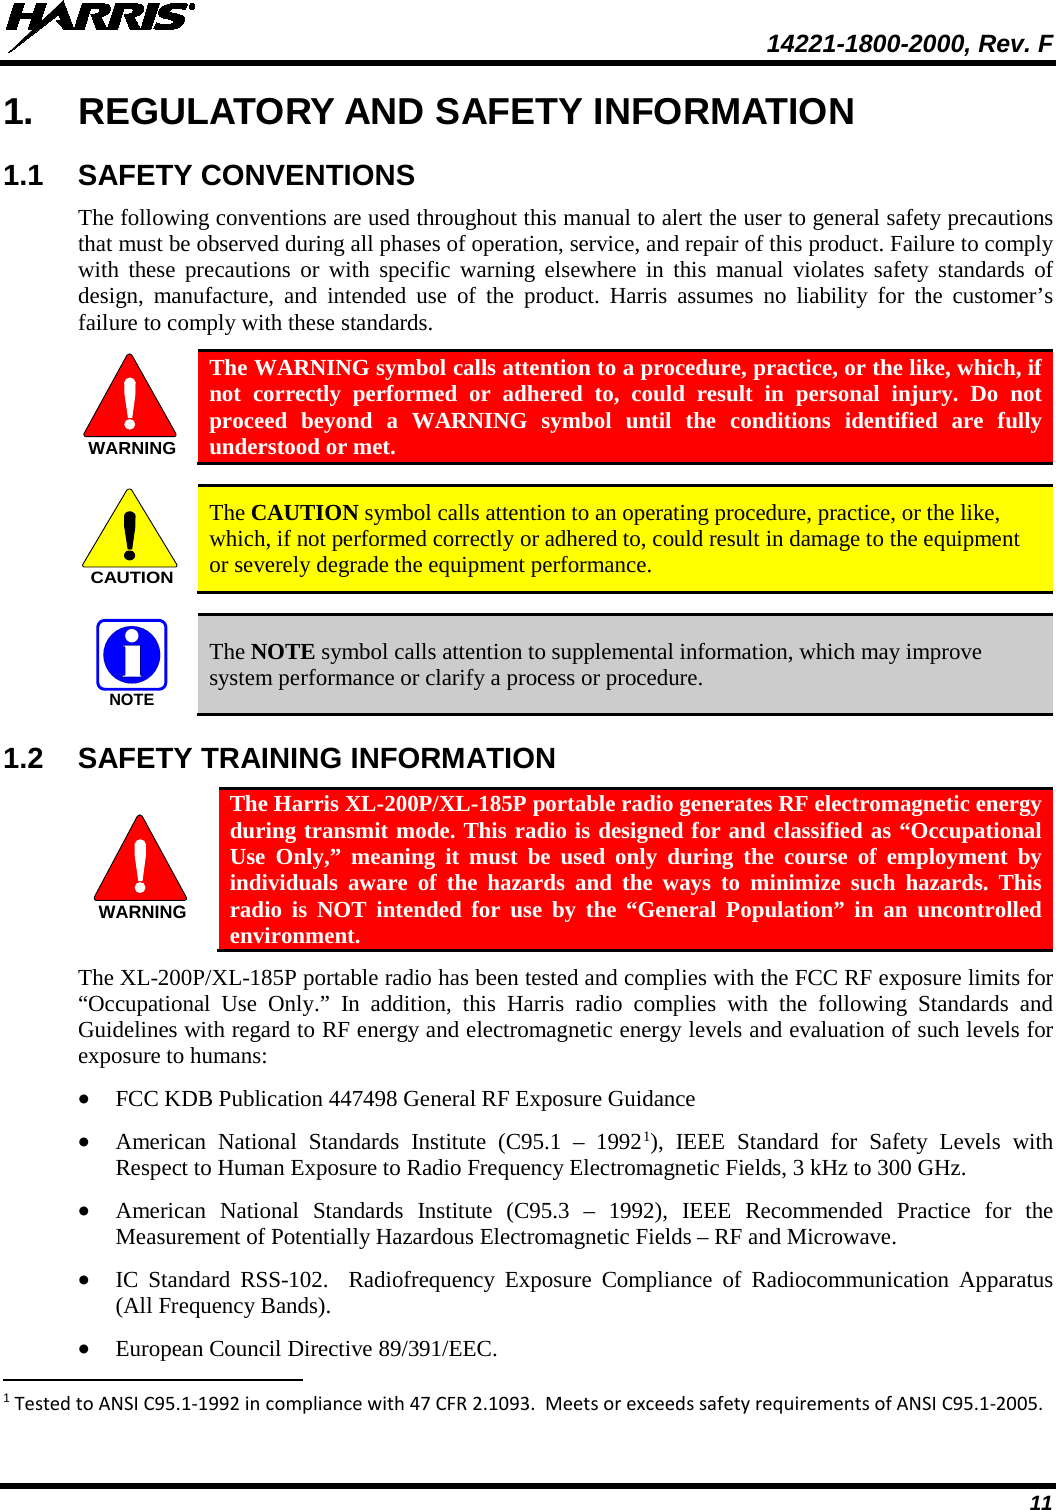  14221-1800-2000, Rev. F 11 1. REGULATORY AND SAFETY INFORMATION 1.1 SAFETY CONVENTIONS The following conventions are used throughout this manual to alert the user to general safety precautions that must be observed during all phases of operation, service, and repair of this product. Failure to comply with these precautions or with specific warning elsewhere in this manual violates safety standards of design, manufacture, and intended use of the product. Harris assumes no liability for the customer’s failure to comply with these standards.  The WARNING symbol calls attention to a procedure, practice, or the like, which, if not correctly performed or adhered to, could result in personal injury. Do not proceed beyond a WARNING symbol until the conditions identified are fully understood or met.     The CAUTION symbol calls attention to an operating procedure, practice, or the like, which, if not performed correctly or adhered to, could result in damage to the equipment or severely degrade the equipment performance.     The NOTE symbol calls attention to supplemental information, which may improve system performance or clarify a process or procedure. 1.2 SAFETY TRAINING INFORMATION  The Harris XL-200P/XL-185P portable radio generates RF electromagnetic energy during transmit mode. This radio is designed for and classified as “Occupational Use Only,” meaning it must be used only during the course of employment by individuals aware of the hazards and the ways to minimize such hazards. This radio is NOT intended for use by the “General Population” in an uncontrolled environment. The XL-200P/XL-185P portable radio has been tested and complies with the FCC RF exposure limits for “Occupational Use Only.”  In addition, this Harris radio complies with the following Standards and Guidelines with regard to RF energy and electromagnetic energy levels and evaluation of such levels for exposure to humans: • FCC KDB Publication 447498 General RF Exposure Guidance • American National Standards Institute (C95.1 –  19921), IEEE Standard for Safety Levels with Respect to Human Exposure to Radio Frequency Electromagnetic Fields, 3 kHz to 300 GHz. • American National Standards Institute (C95.3 –  1992), IEEE Recommended Practice for the Measurement of Potentially Hazardous Electromagnetic Fields – RF and Microwave. • IC Standard RSS-102.  Radiofrequency Exposure Compliance of Radiocommunication Apparatus (All Frequency Bands). • European Council Directive 89/391/EEC.                                                            1 Tested to ANSI C95.1-1992 in compliance with 47 CFR 2.1093.  Meets or exceeds safety requirements of ANSI C95.1-2005. WARNINGCAUTIONNOTEWARNING